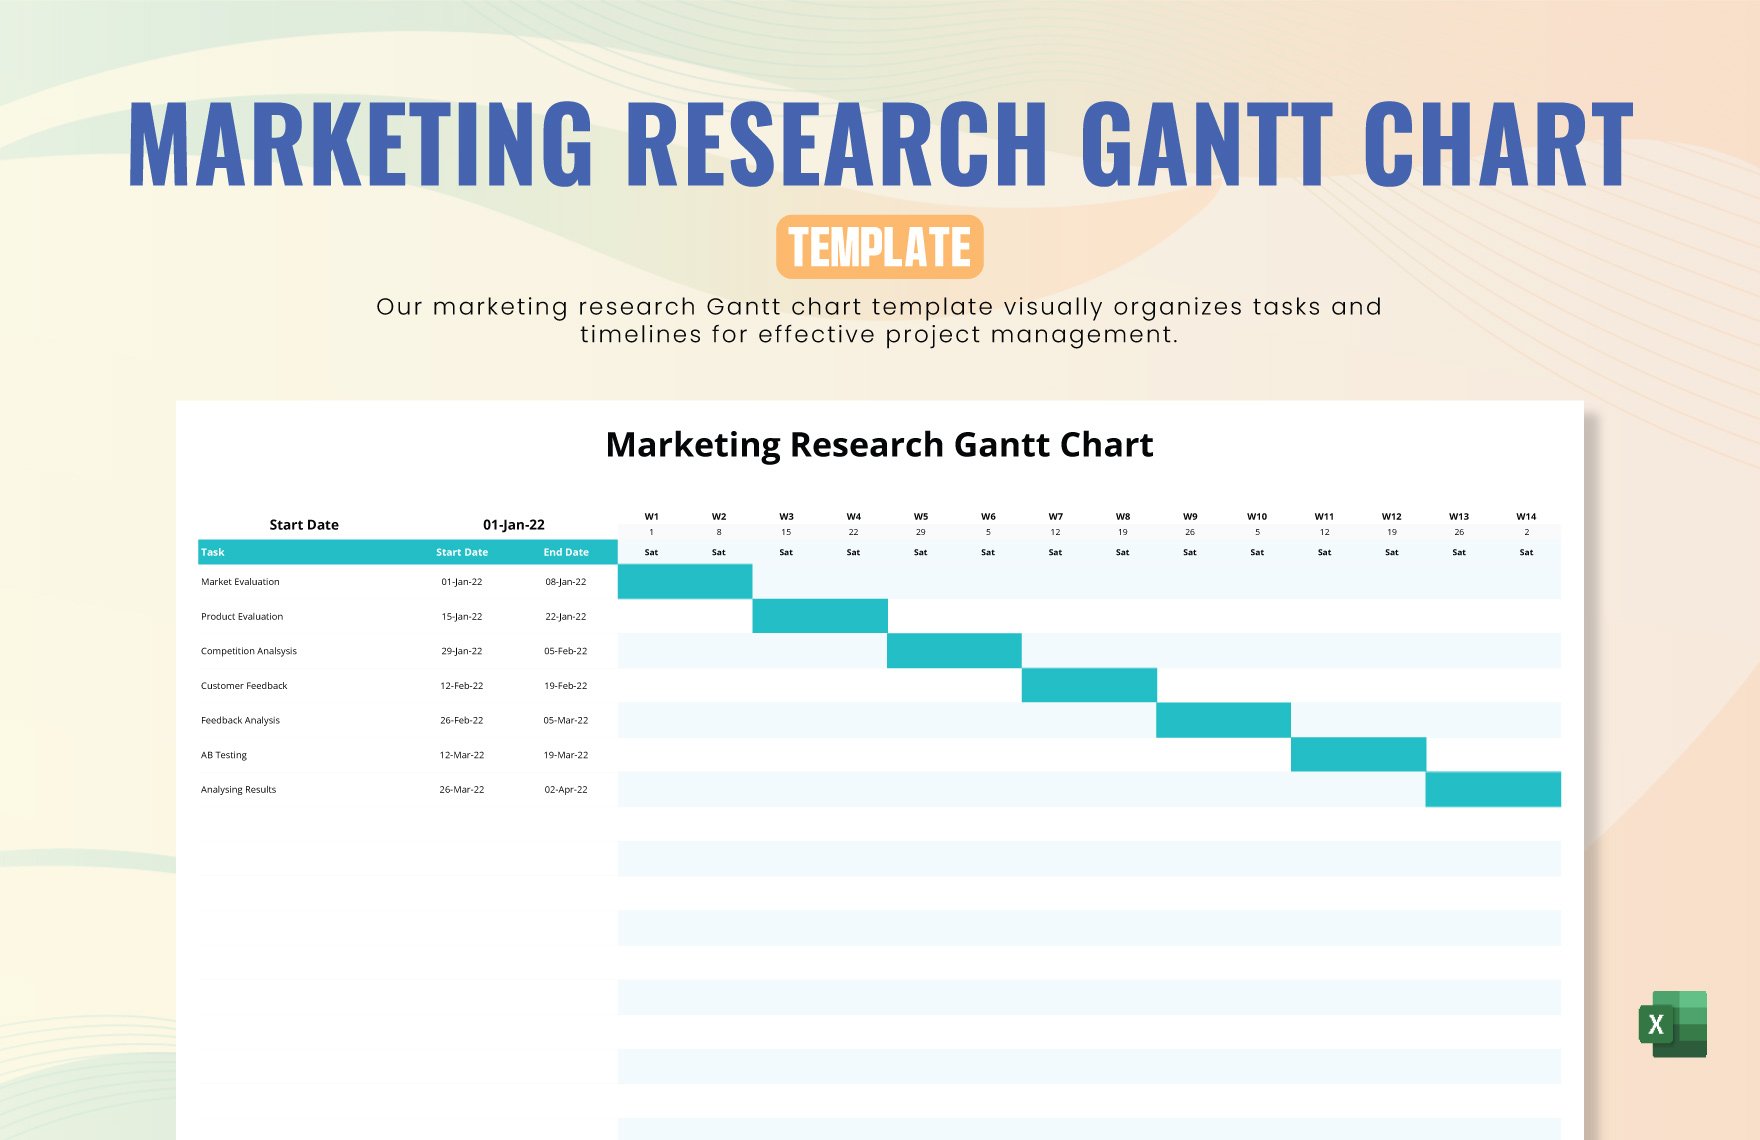 Marketing Research Gantt Chart Template in Excel